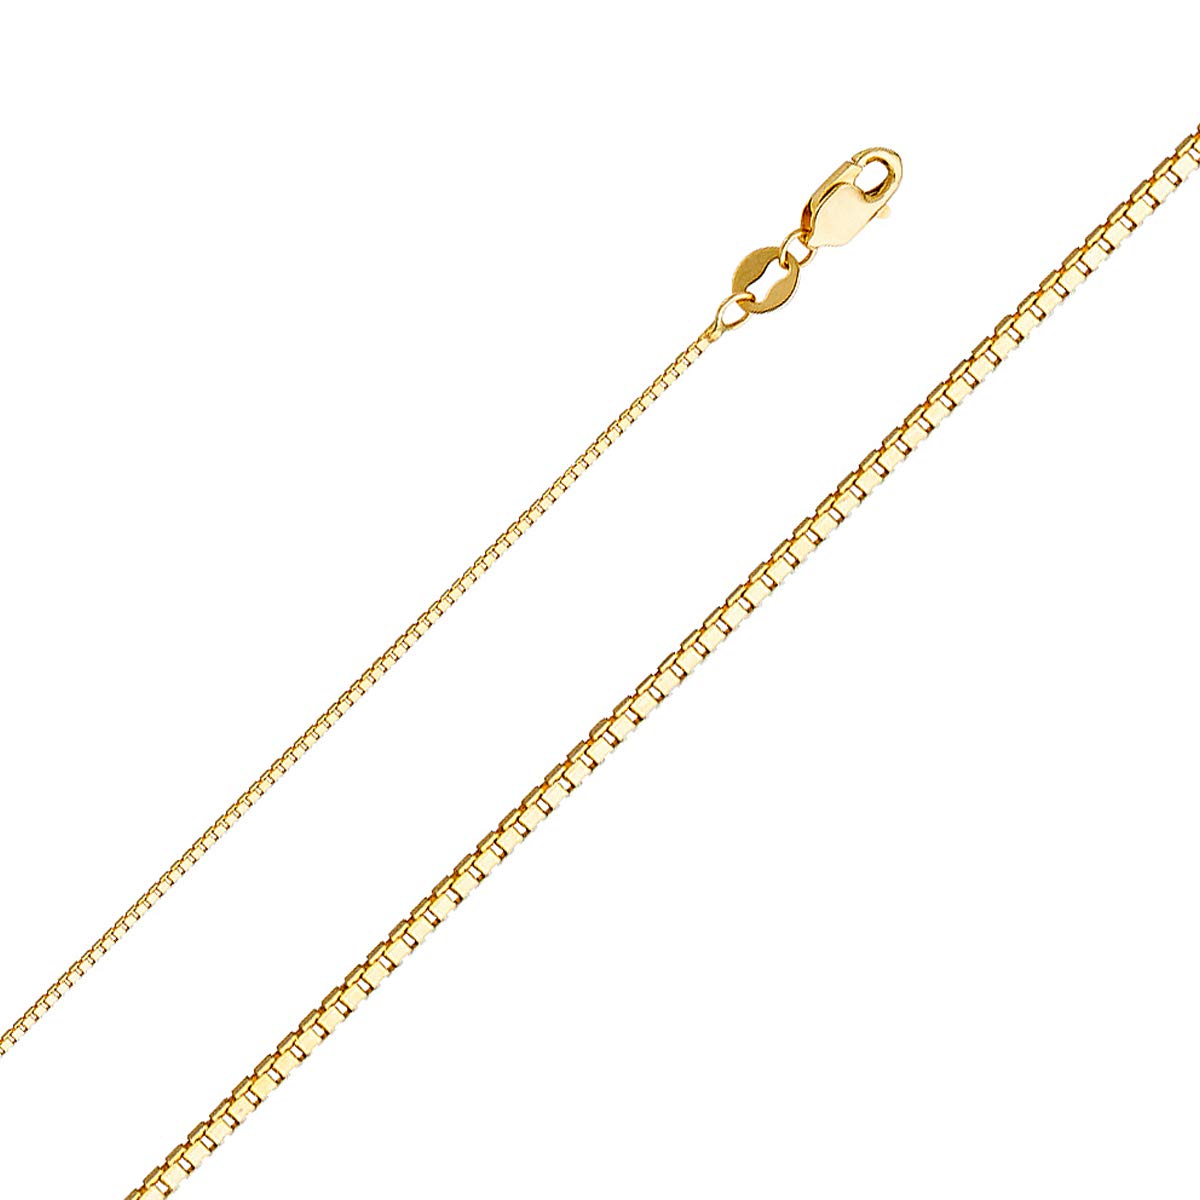 TGDJ 14k Yellow/White/Rose Gold Box Link Chain Necklace - 0.9mm Solid Gold Chain for Men and Women - Great Gift for Christmas, Birthday & All Occasions